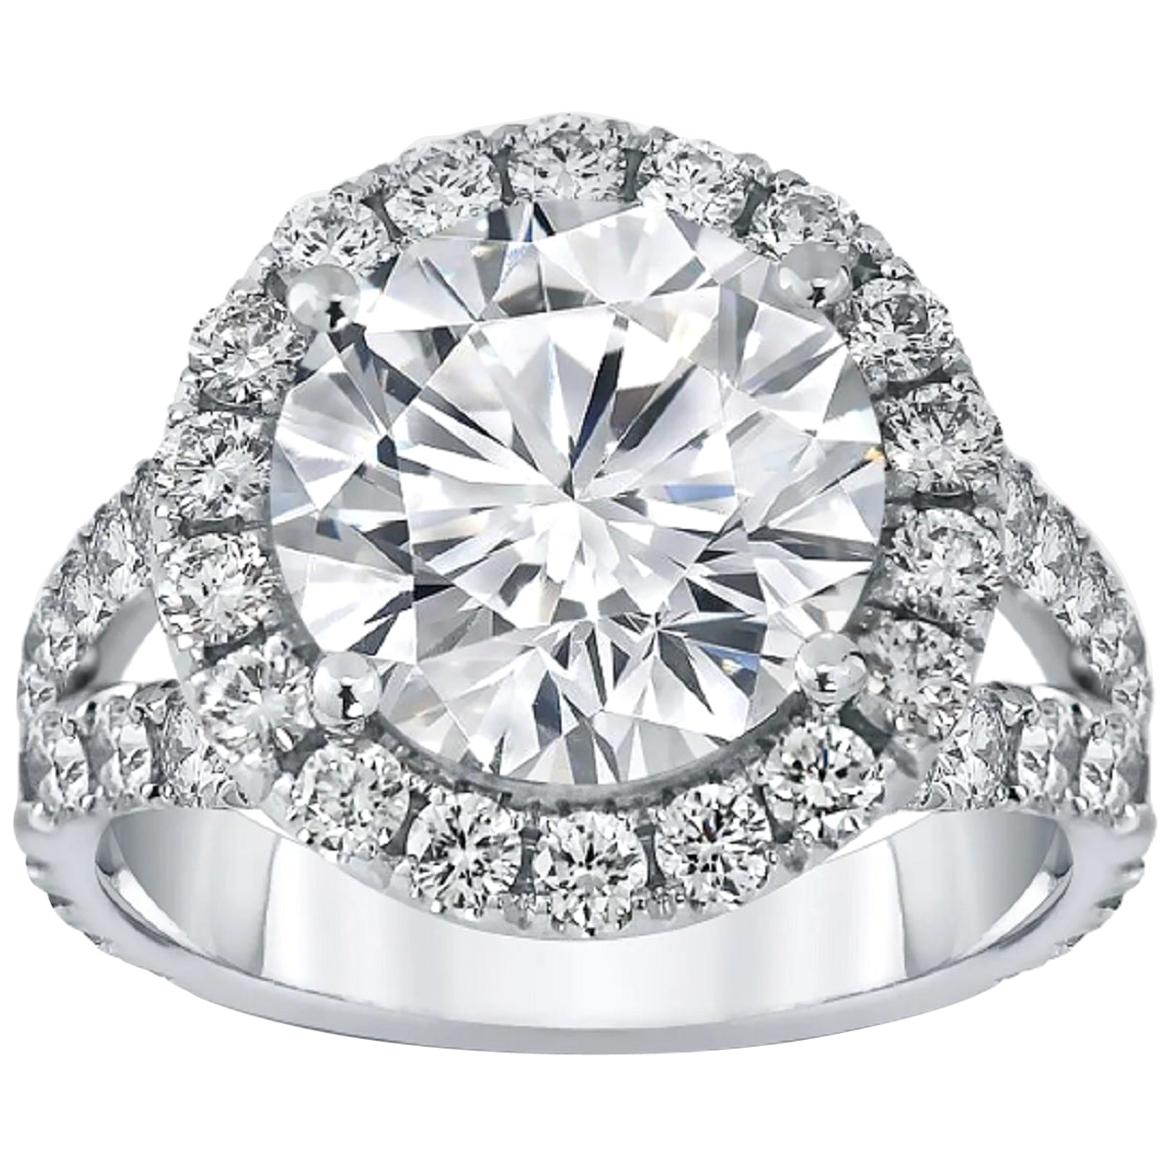 GIA Certified 3.75 Carat Round Brilliant Cut Diamond Ring Shank Pave 